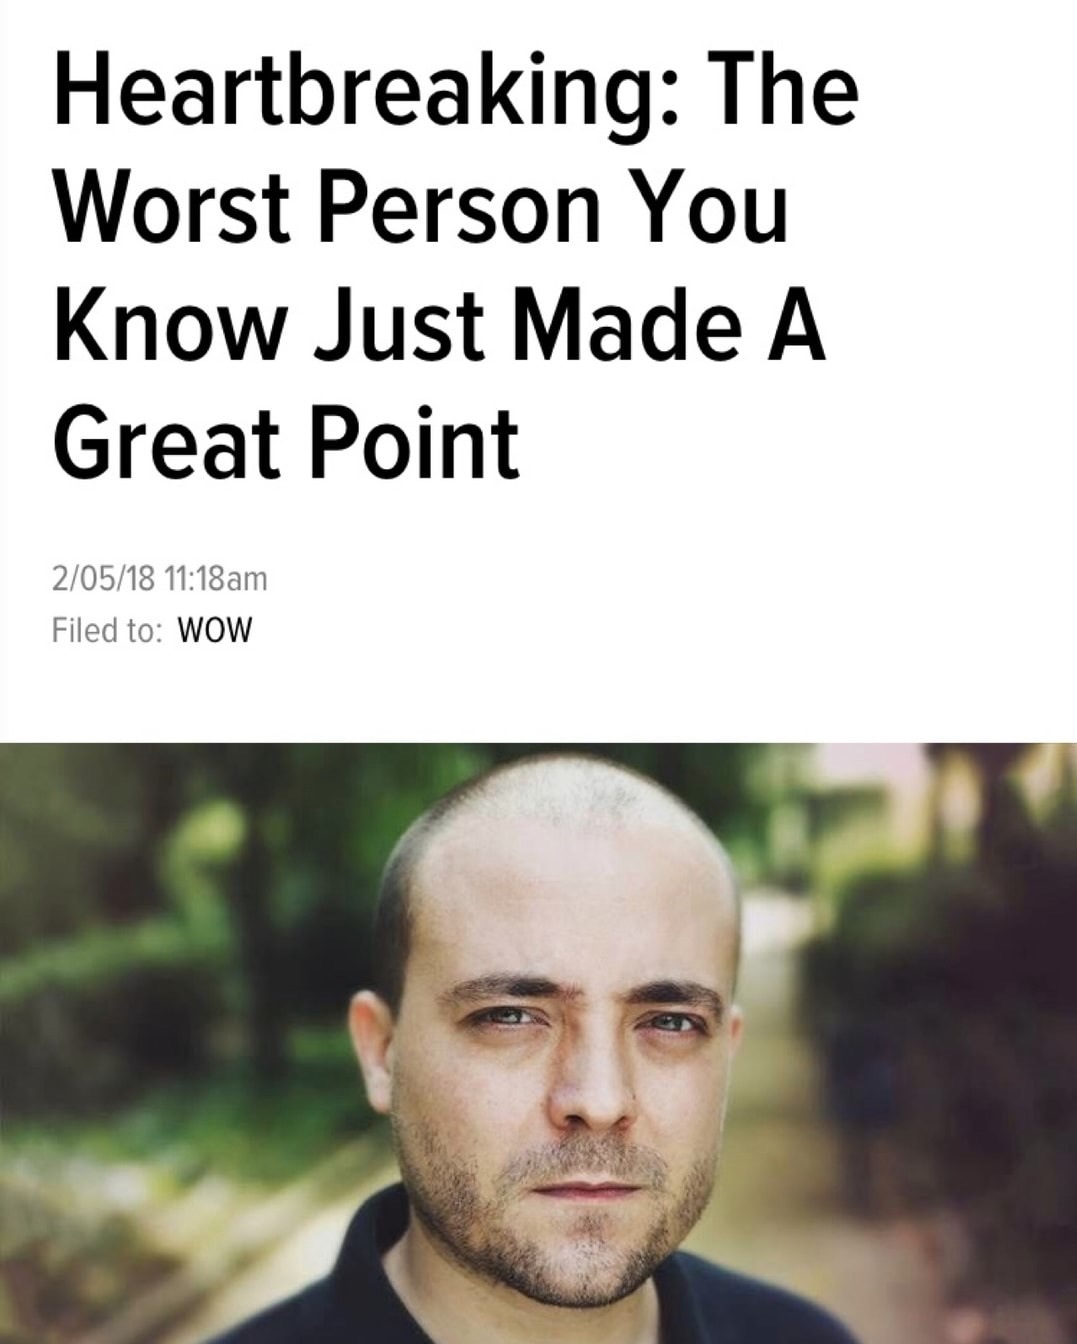 Heartbreaking: The Worst Person You Know Just Made A Great Point meme from The Onion